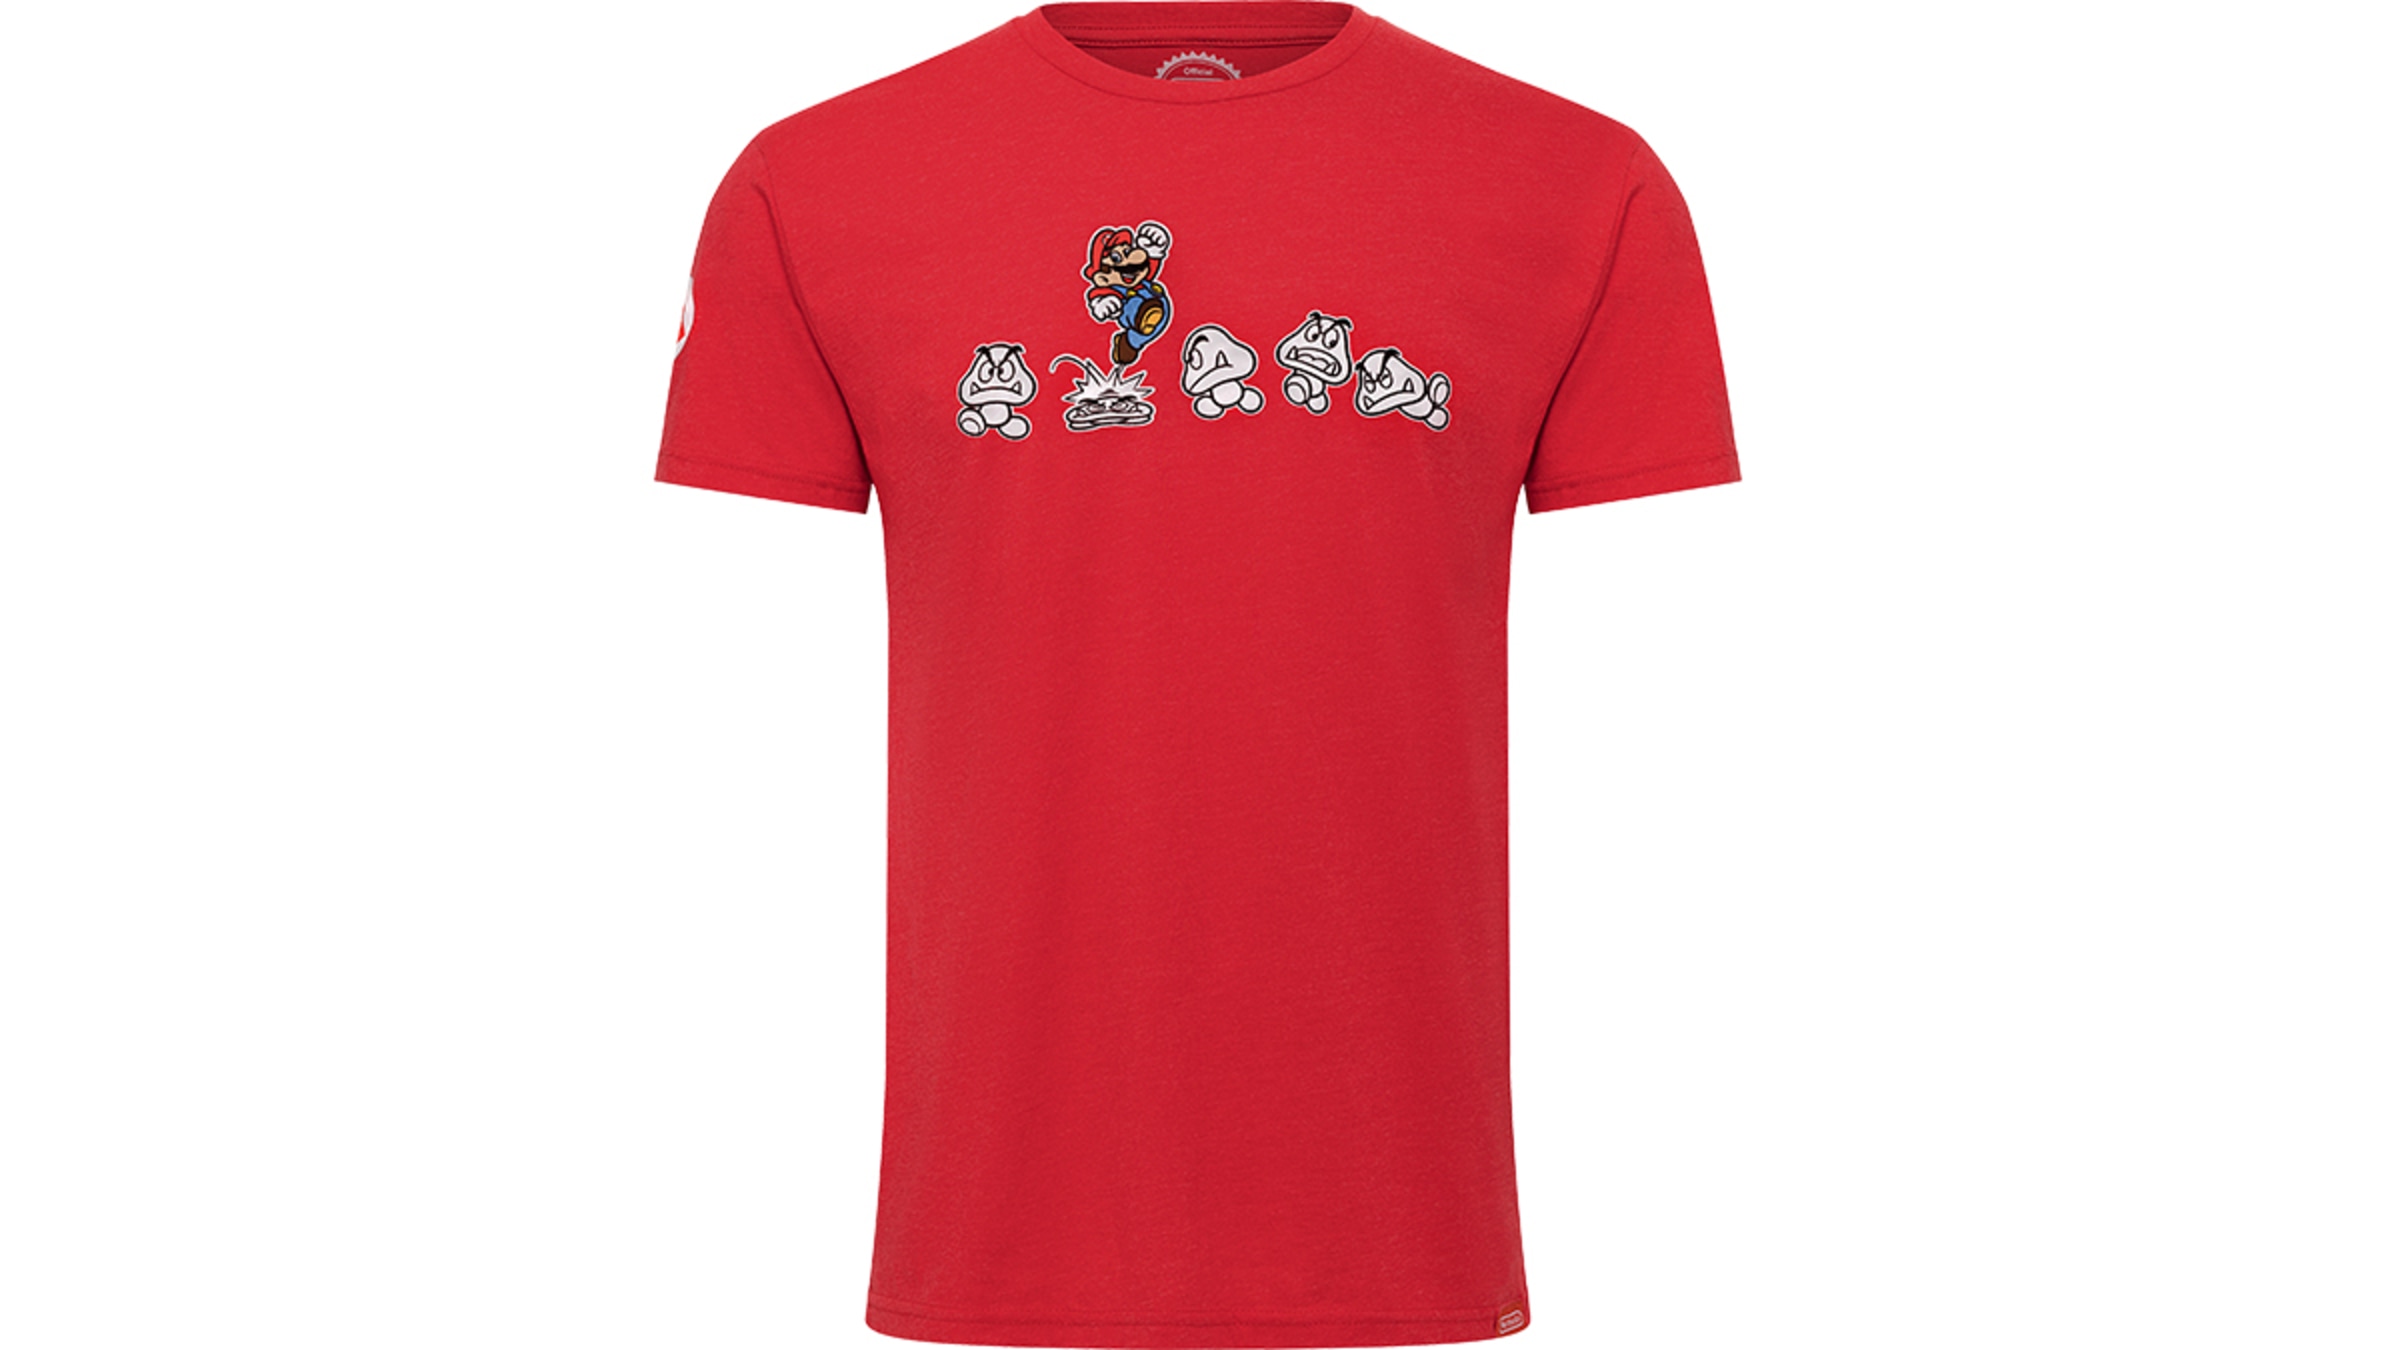 and T-Shirt - Merchandise - Nintendo Official Site